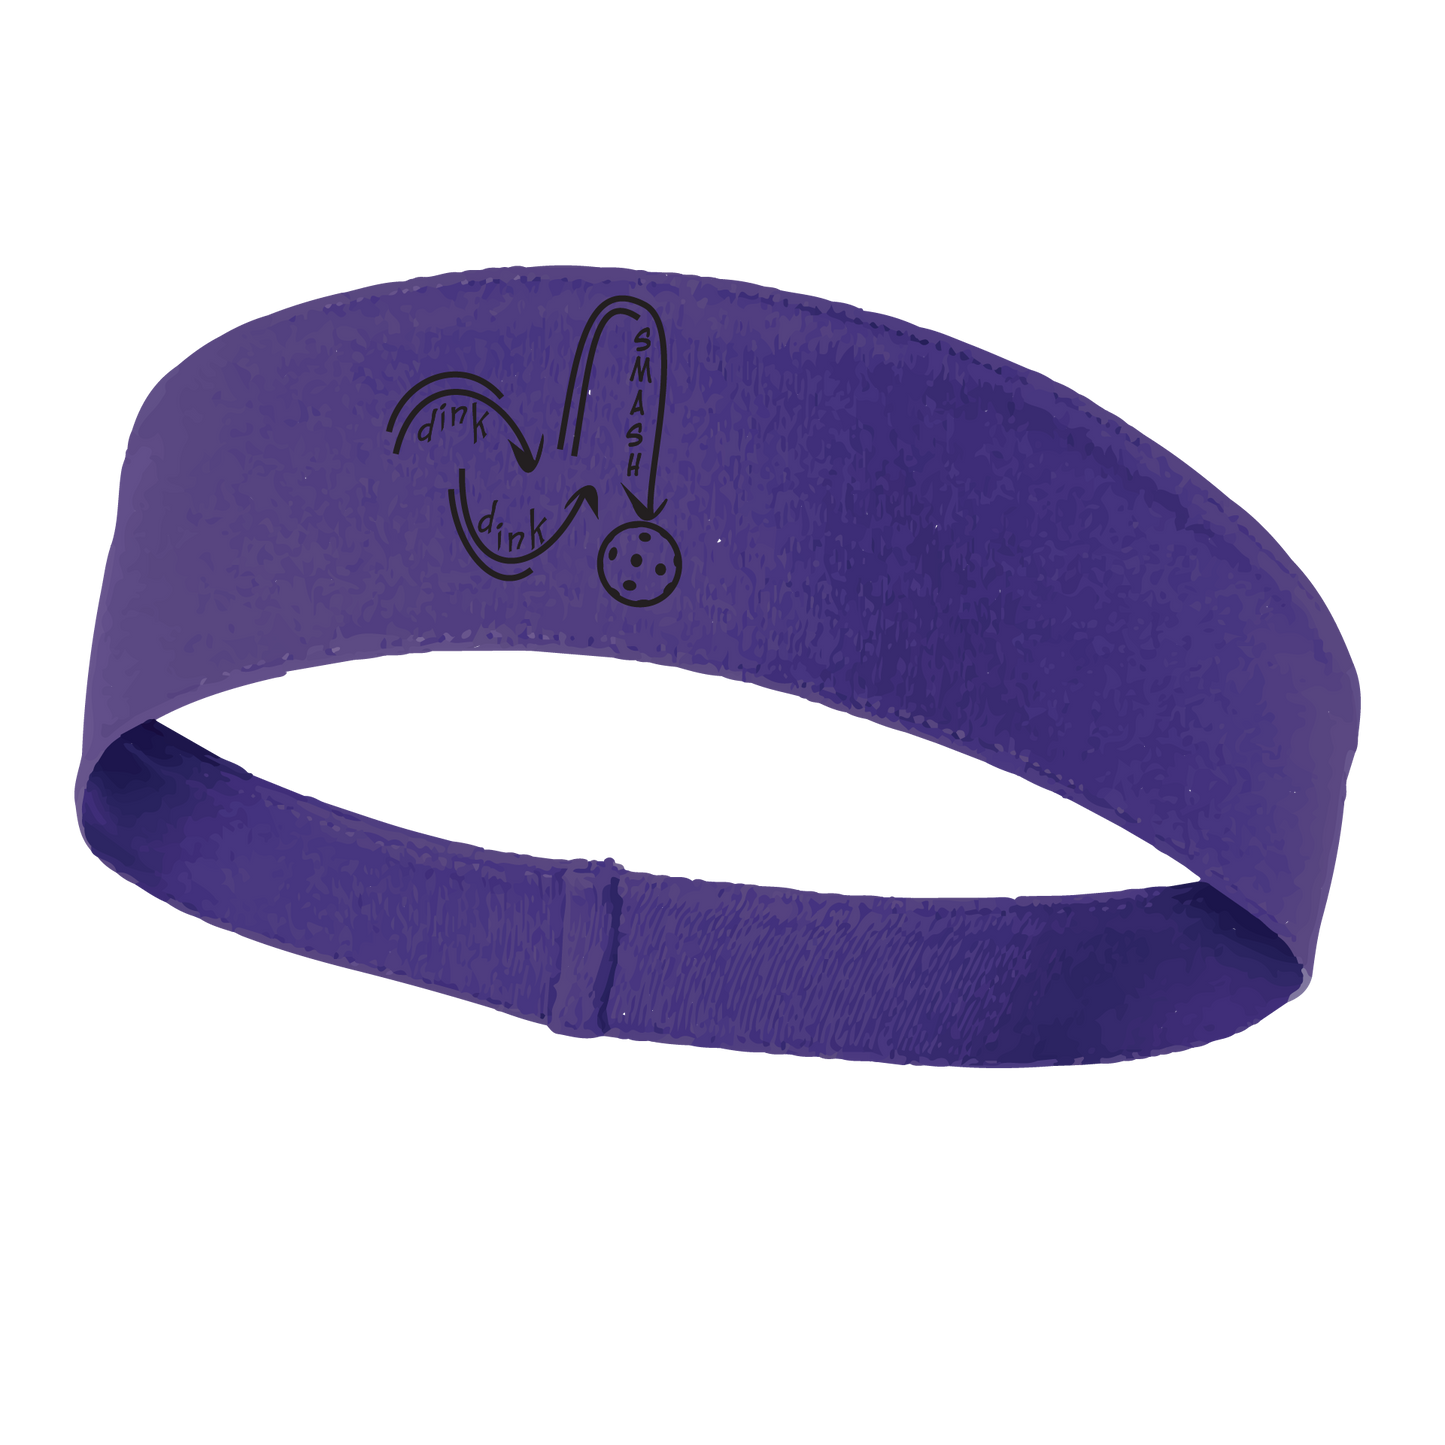 Pickleball Design: Dink Dink Smash in Black  This fun, pickleball designed, moisture-wicking headband narrows in the back to fit more securely. Single-needle top-stitched edging. These headbands come in a variety of colors. Truly shows your love for the sport of pickleball!!